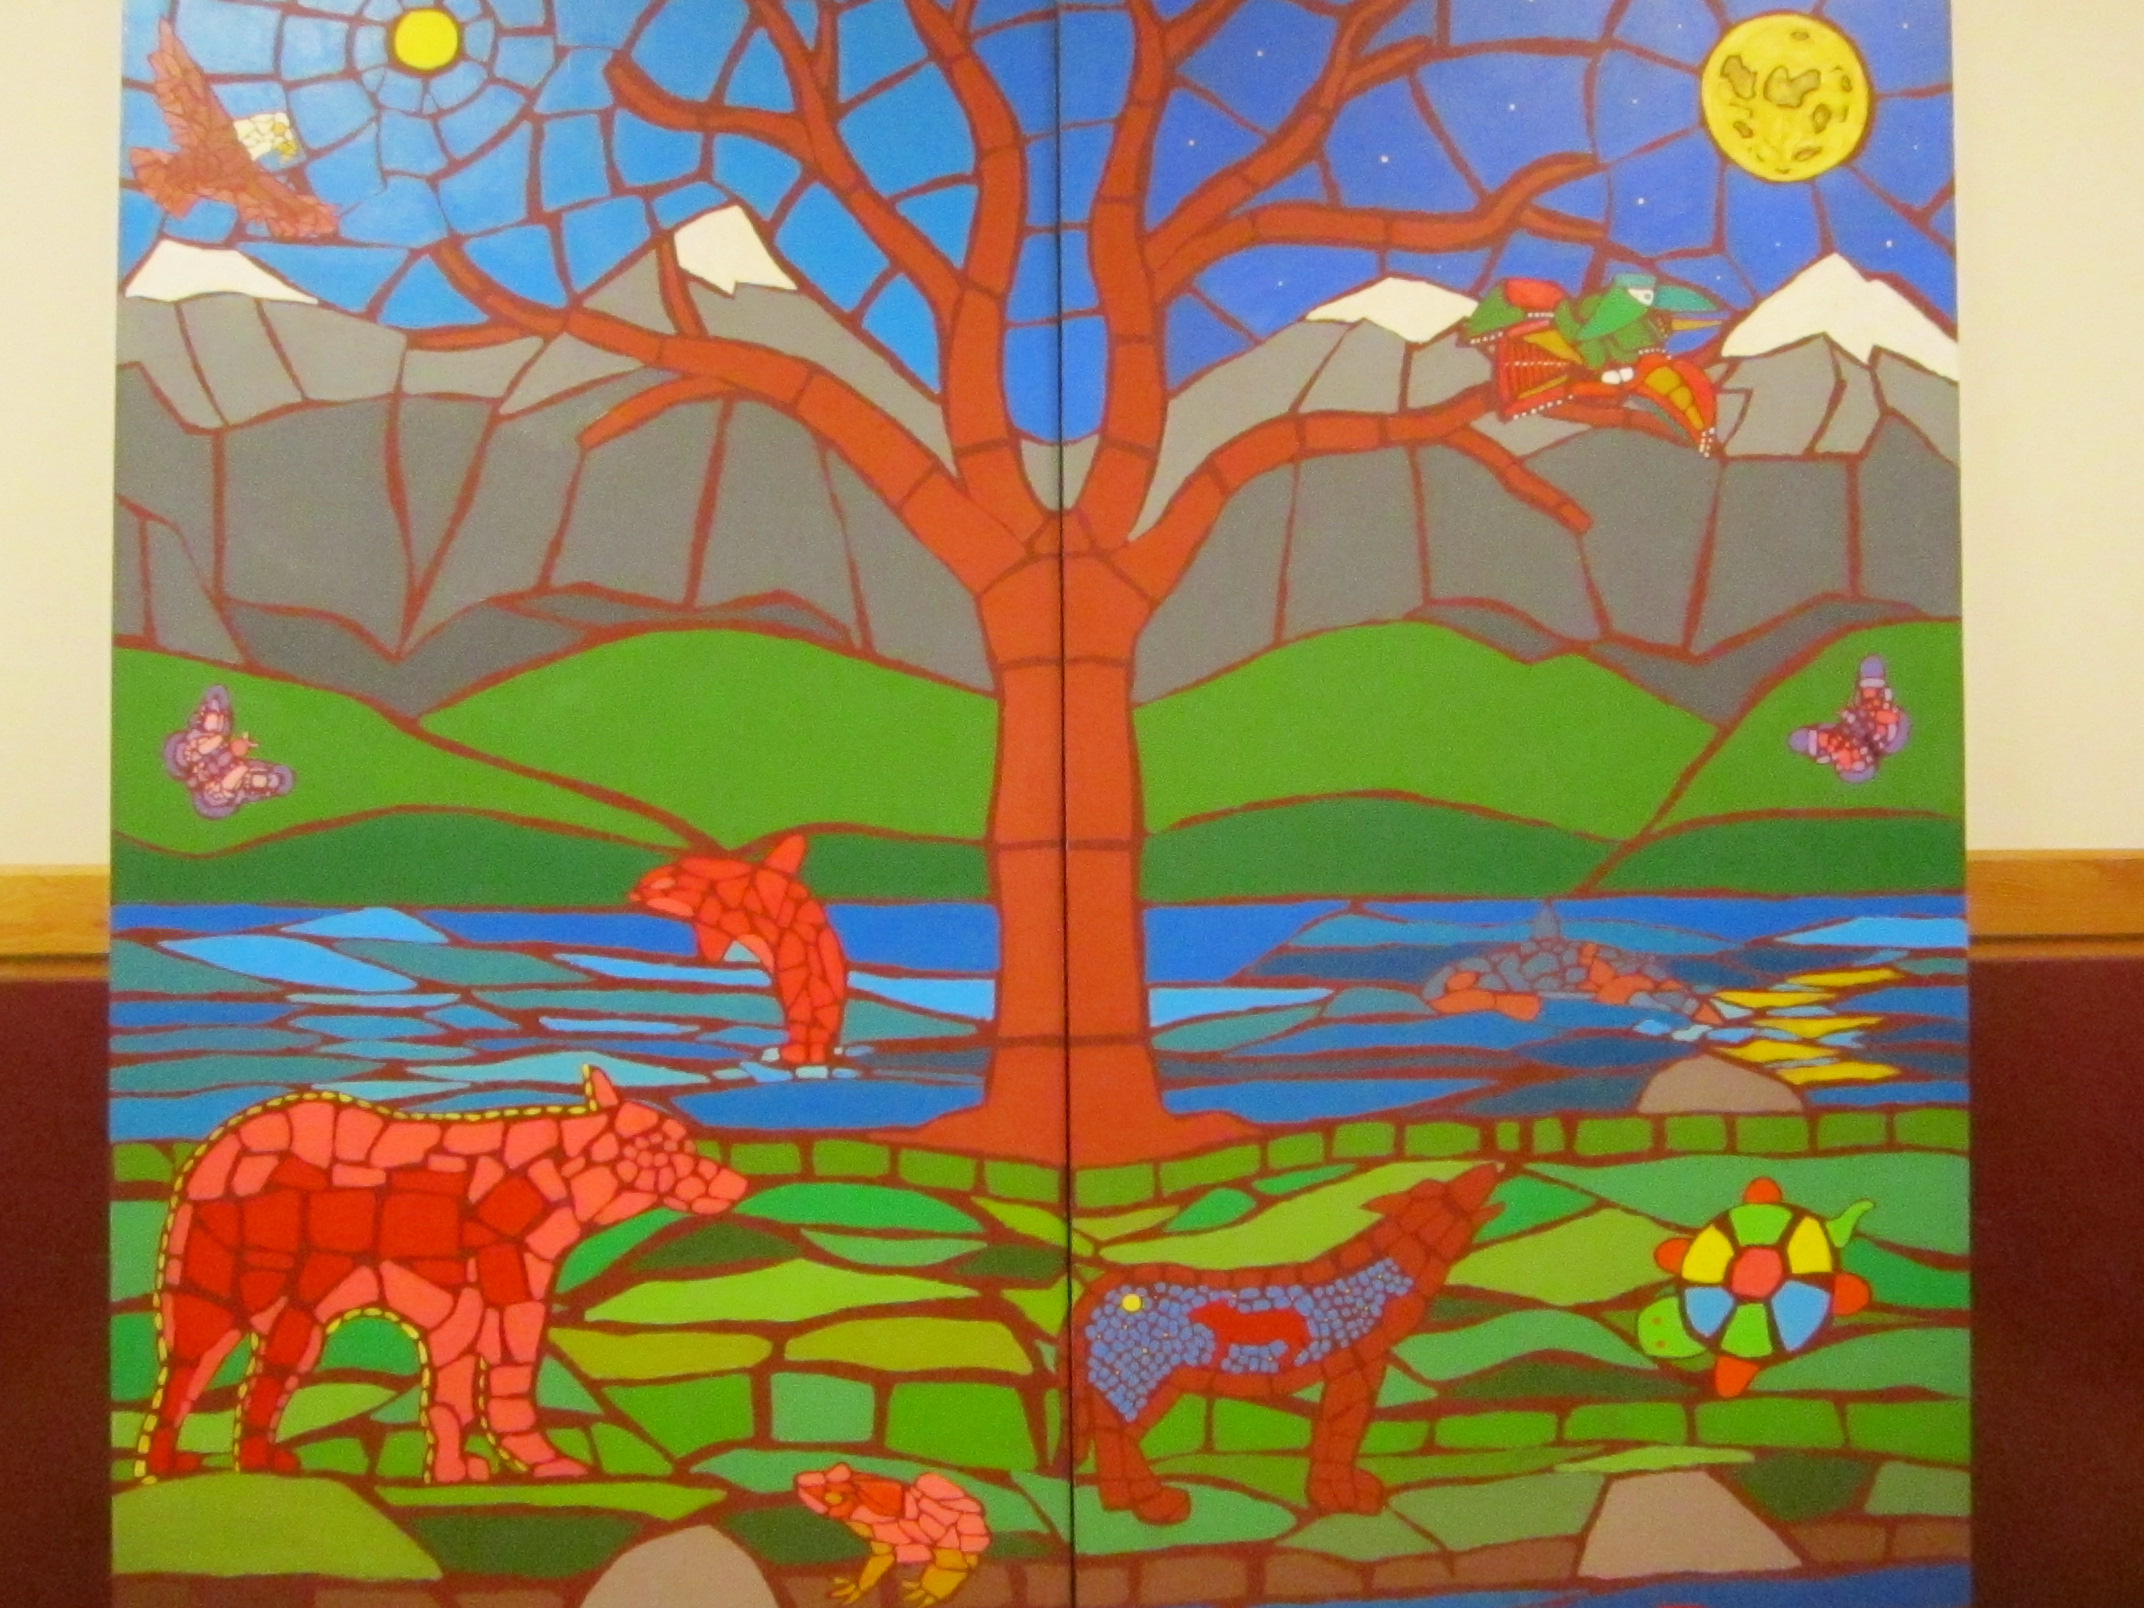 mural-work-with-jerry-whitehead.9256a728377.JPG